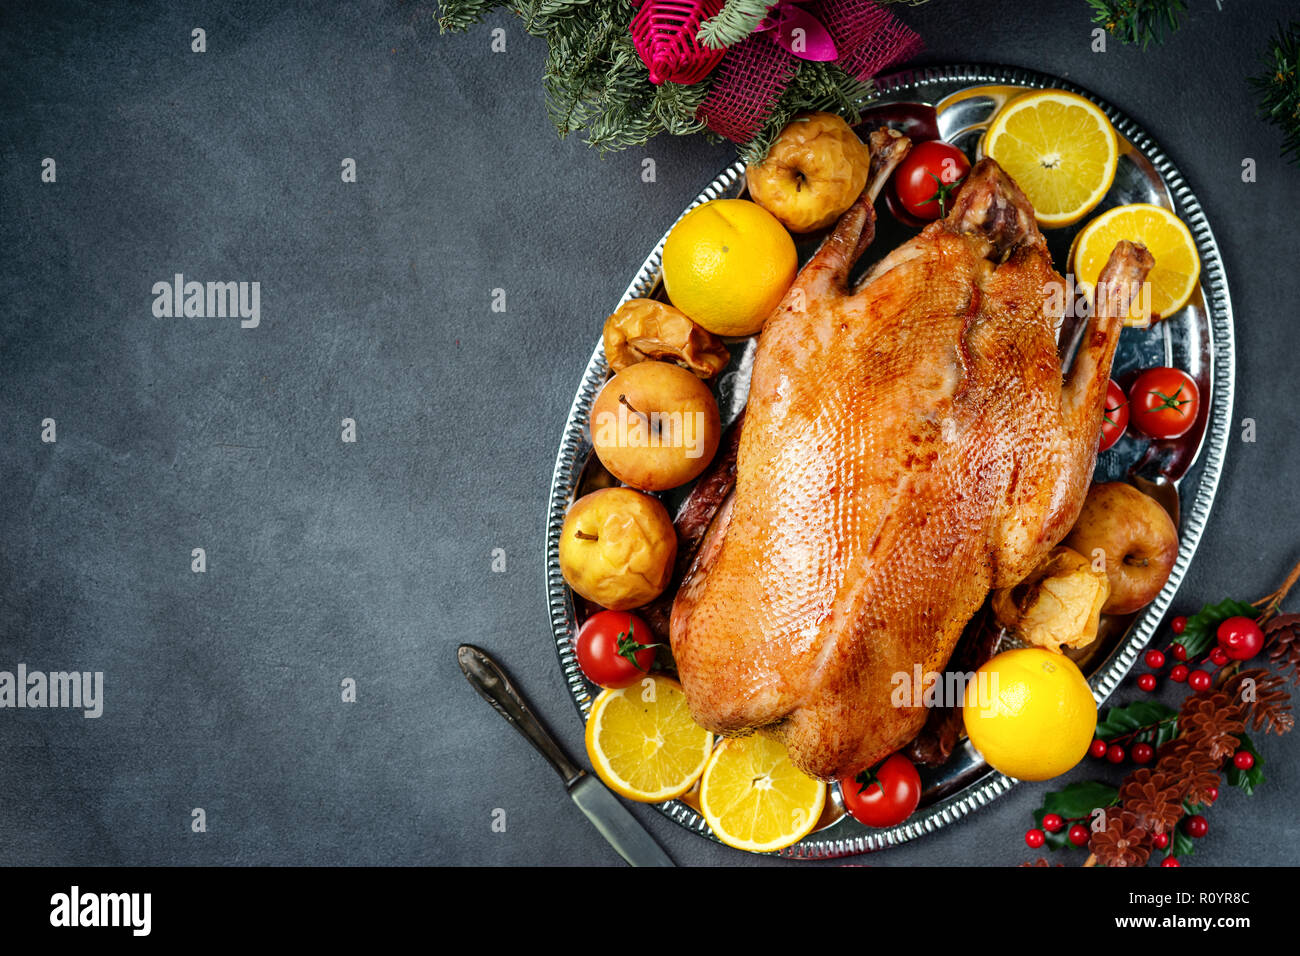 Christmas roasted whole goose on rustic table Stock Photo